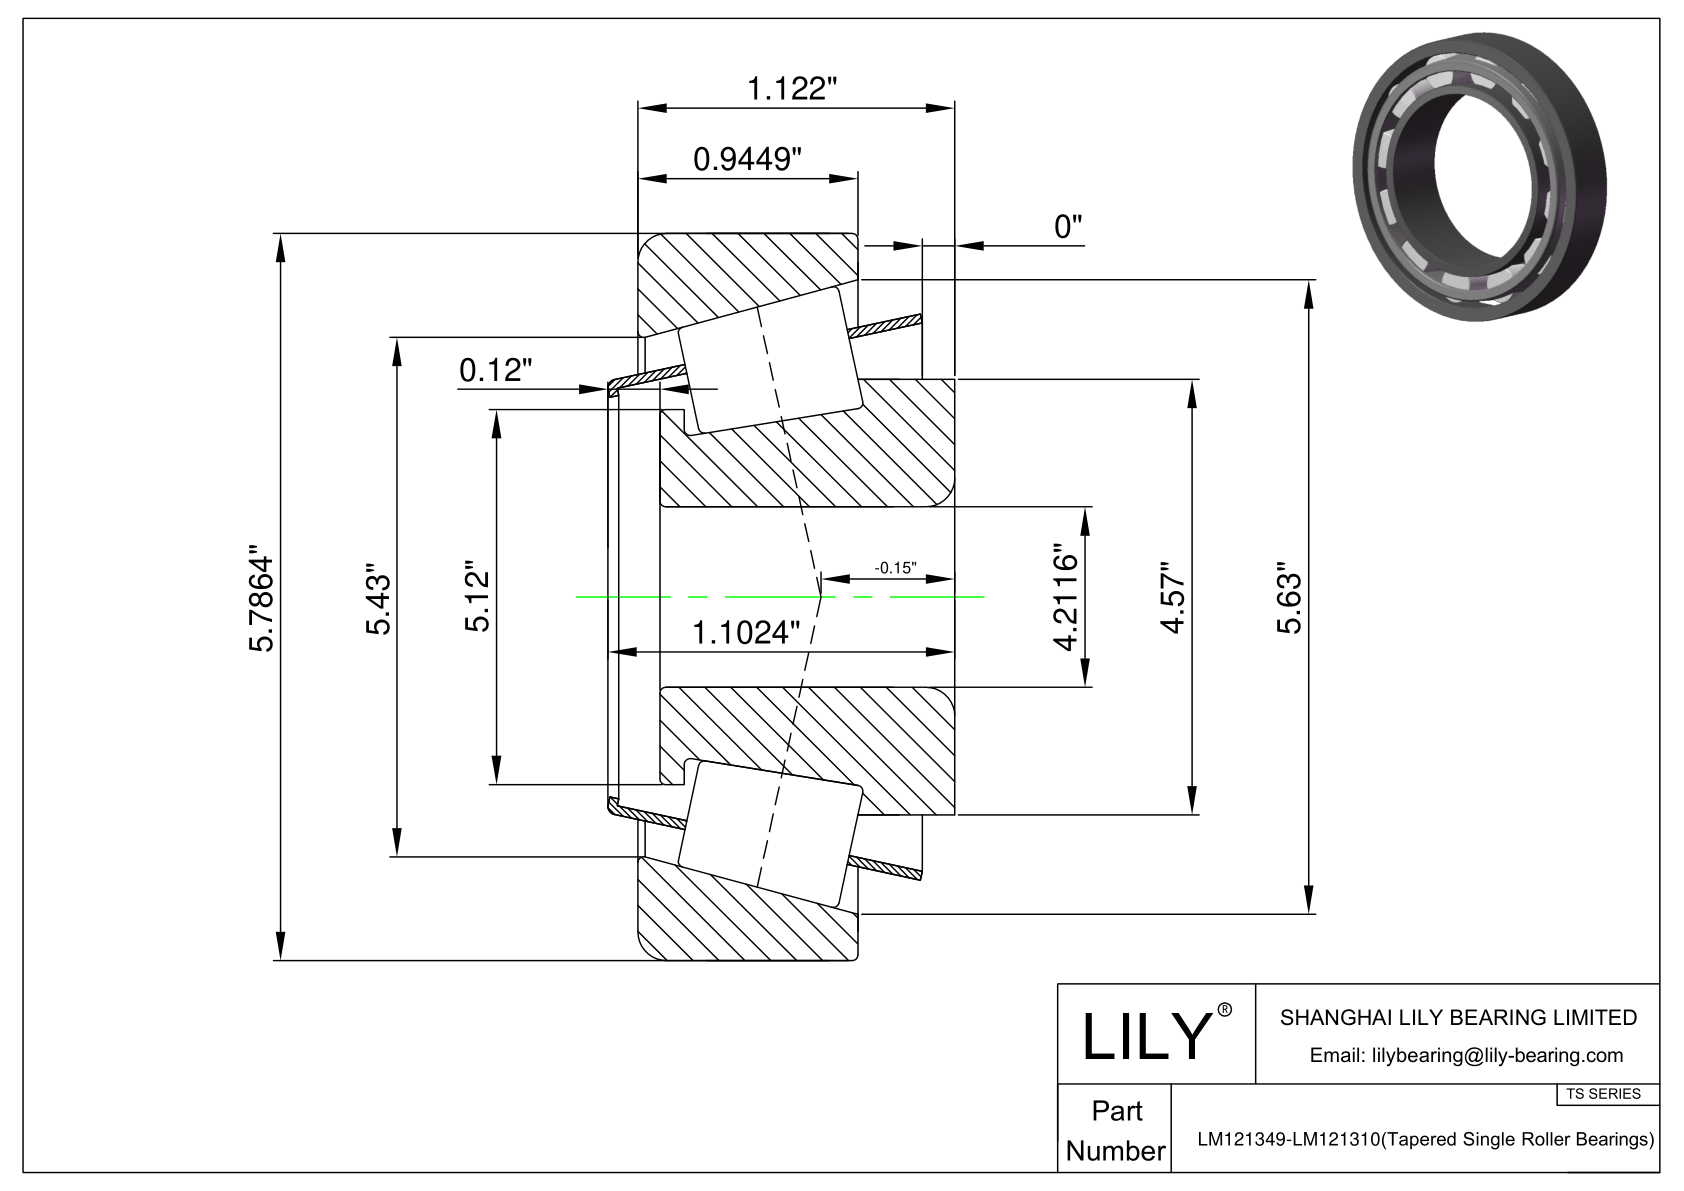 LM121349-LM121310 TS (Tapered Single Roller Bearings) (Imperial) cad drawing